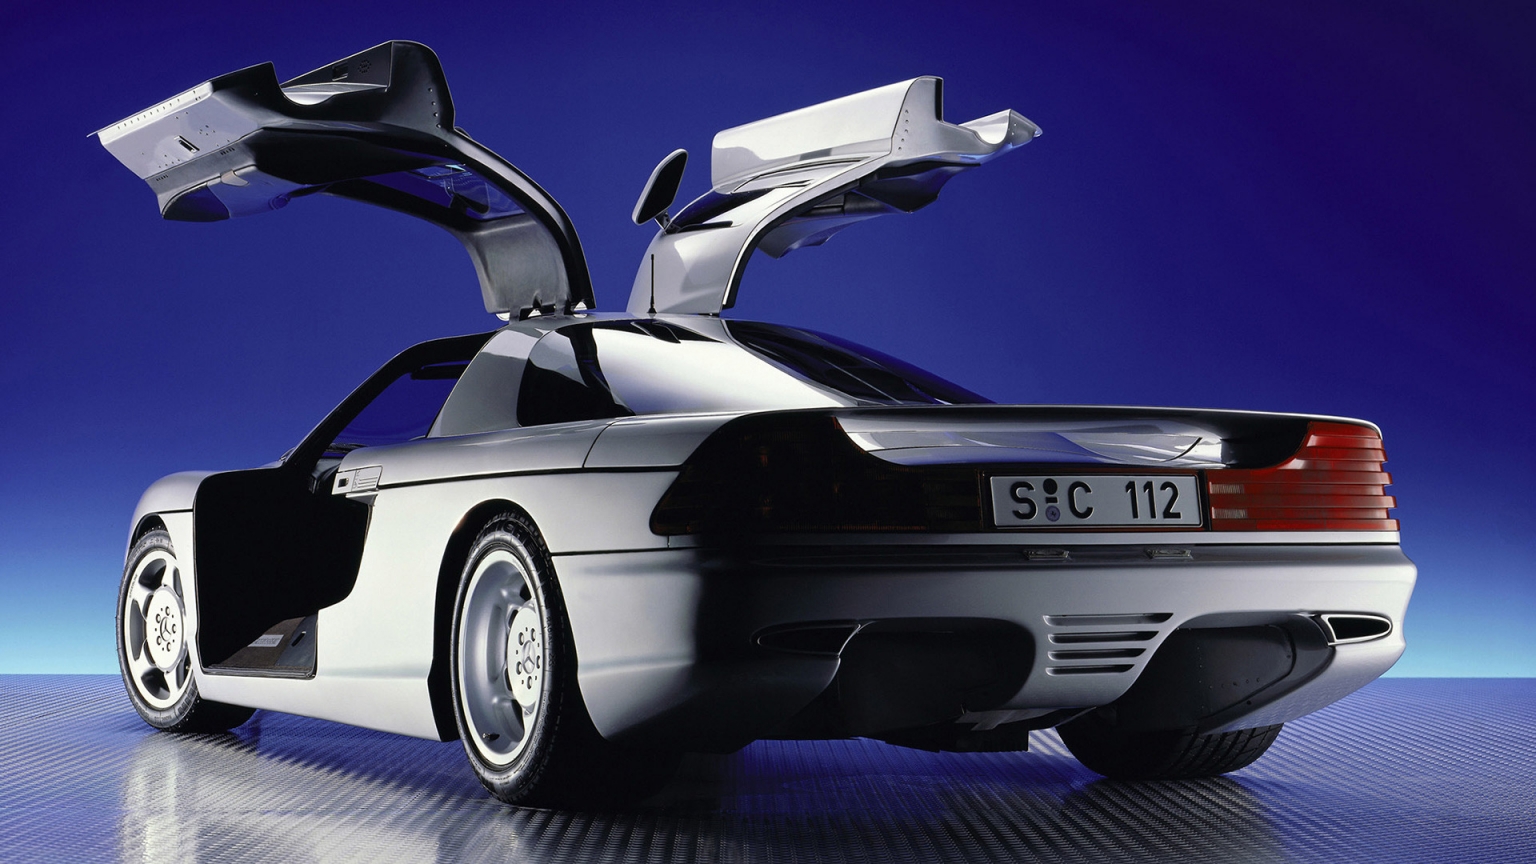 Mercedes C112 Concept 1991 for 1536 x 864 HDTV resolution